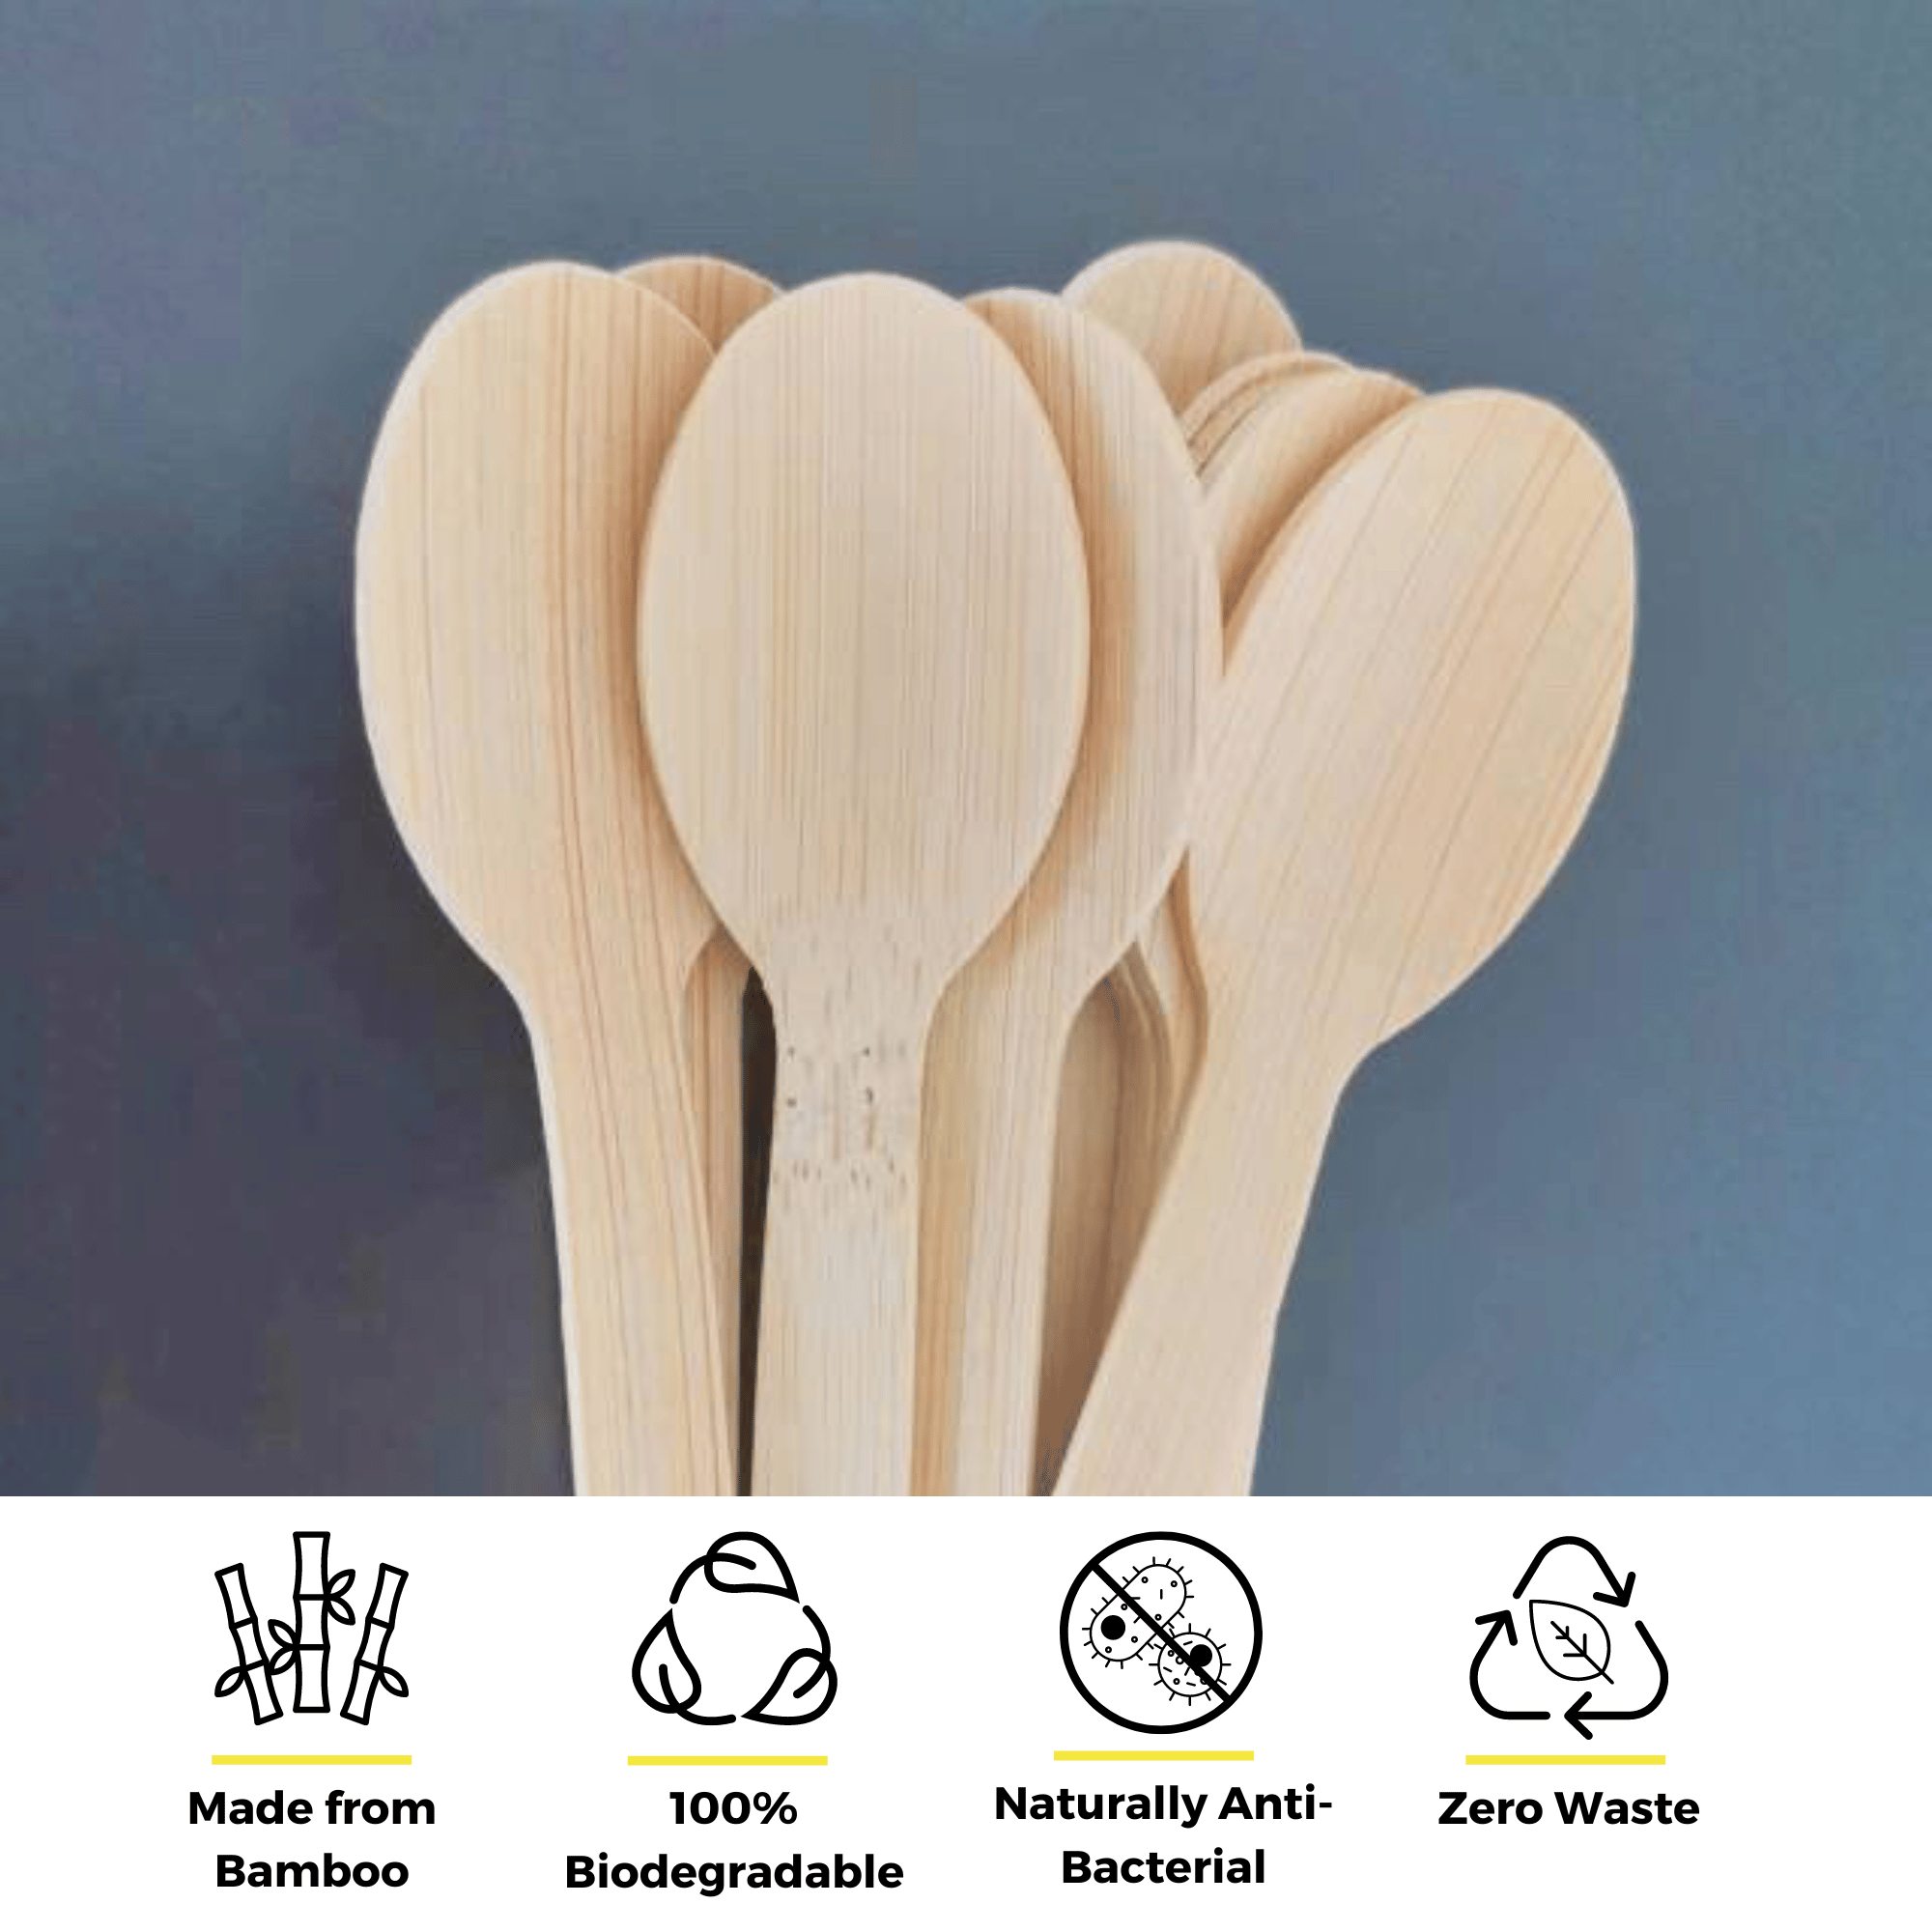 A bundle of bamboo spoons by Holy City Straw Co. grouped together on a dark background, showcasing the product's smooth, natural texture. Accompanying eco-friendly feature icons below highlight that the spoons are Made from Bamboo, 100% Biodegradable, Naturally Anti-bacterial, and contribute to Zero Waste